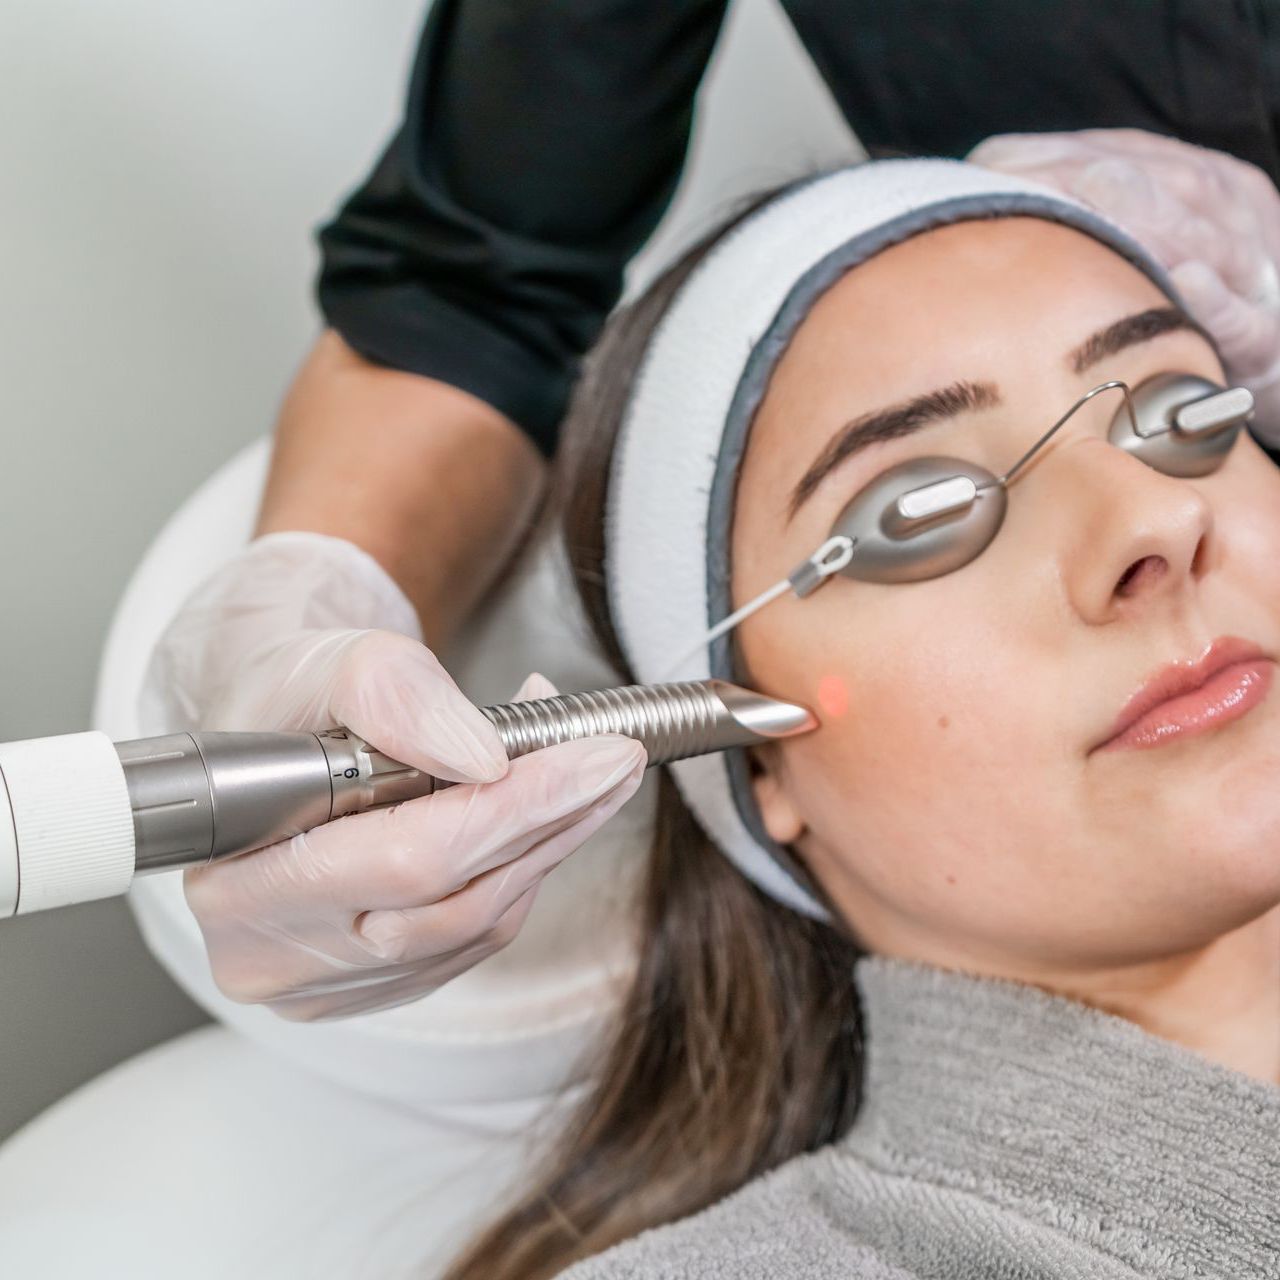 woman-with-carbon-mask-face-receiving-laser-procedures-black-glasses-by-cosmetologist-spa-salon-vertical-shot-og-woman-spa-with-facial-treatment